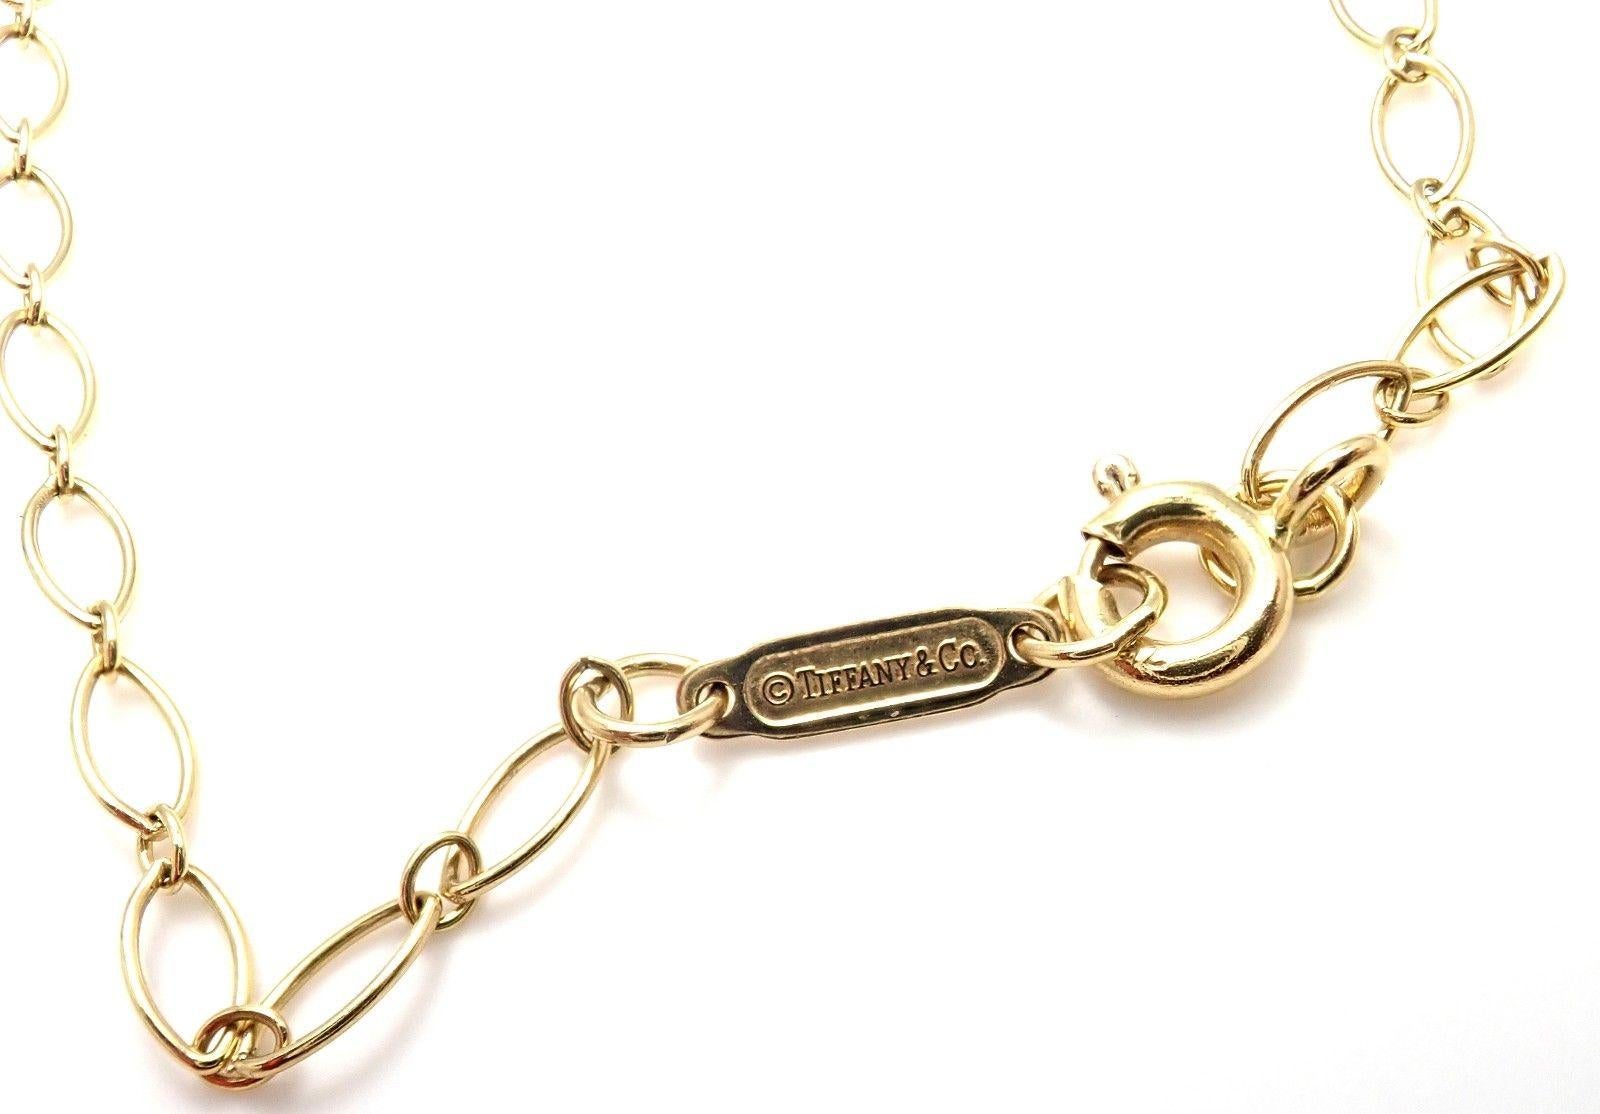 Women's or Men's Tiffany & Co. Trefoil Key Pendant Oval Link Yellow Gold Chain Necklace